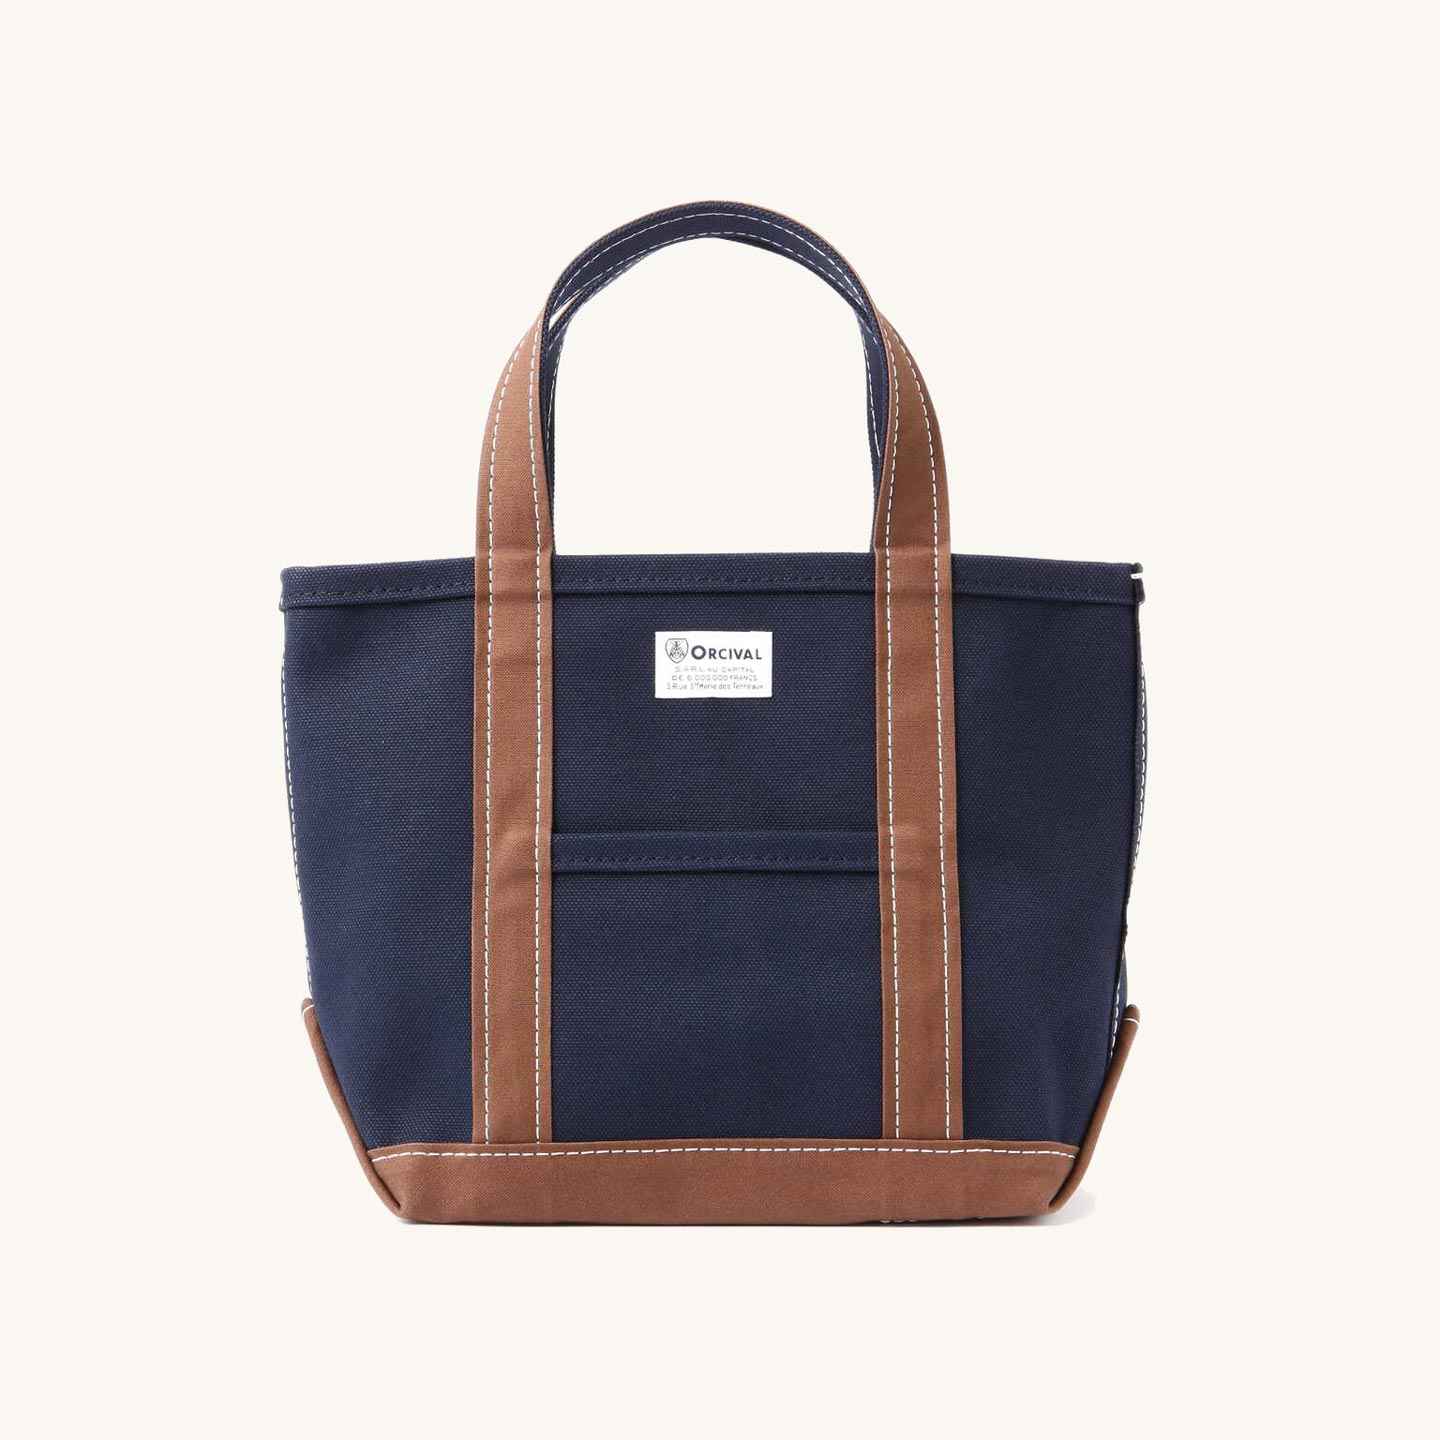 The Marine-Hazelnut tote bag, in a small size, by Orcival